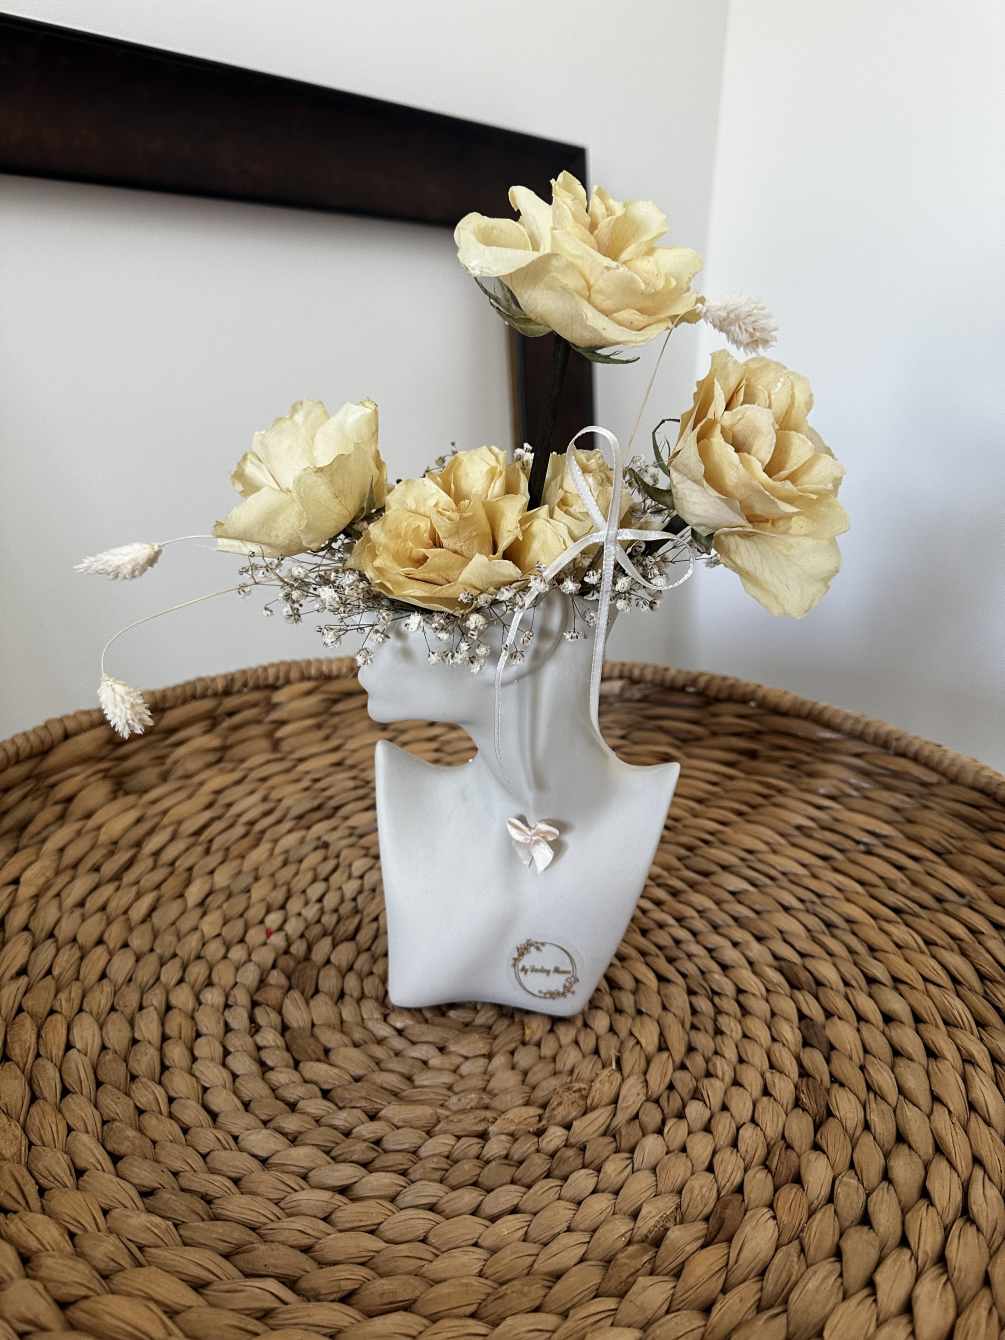 This beautiful flower arrangement has dry flowers on a beautiful ladyhead vase.
Perfect